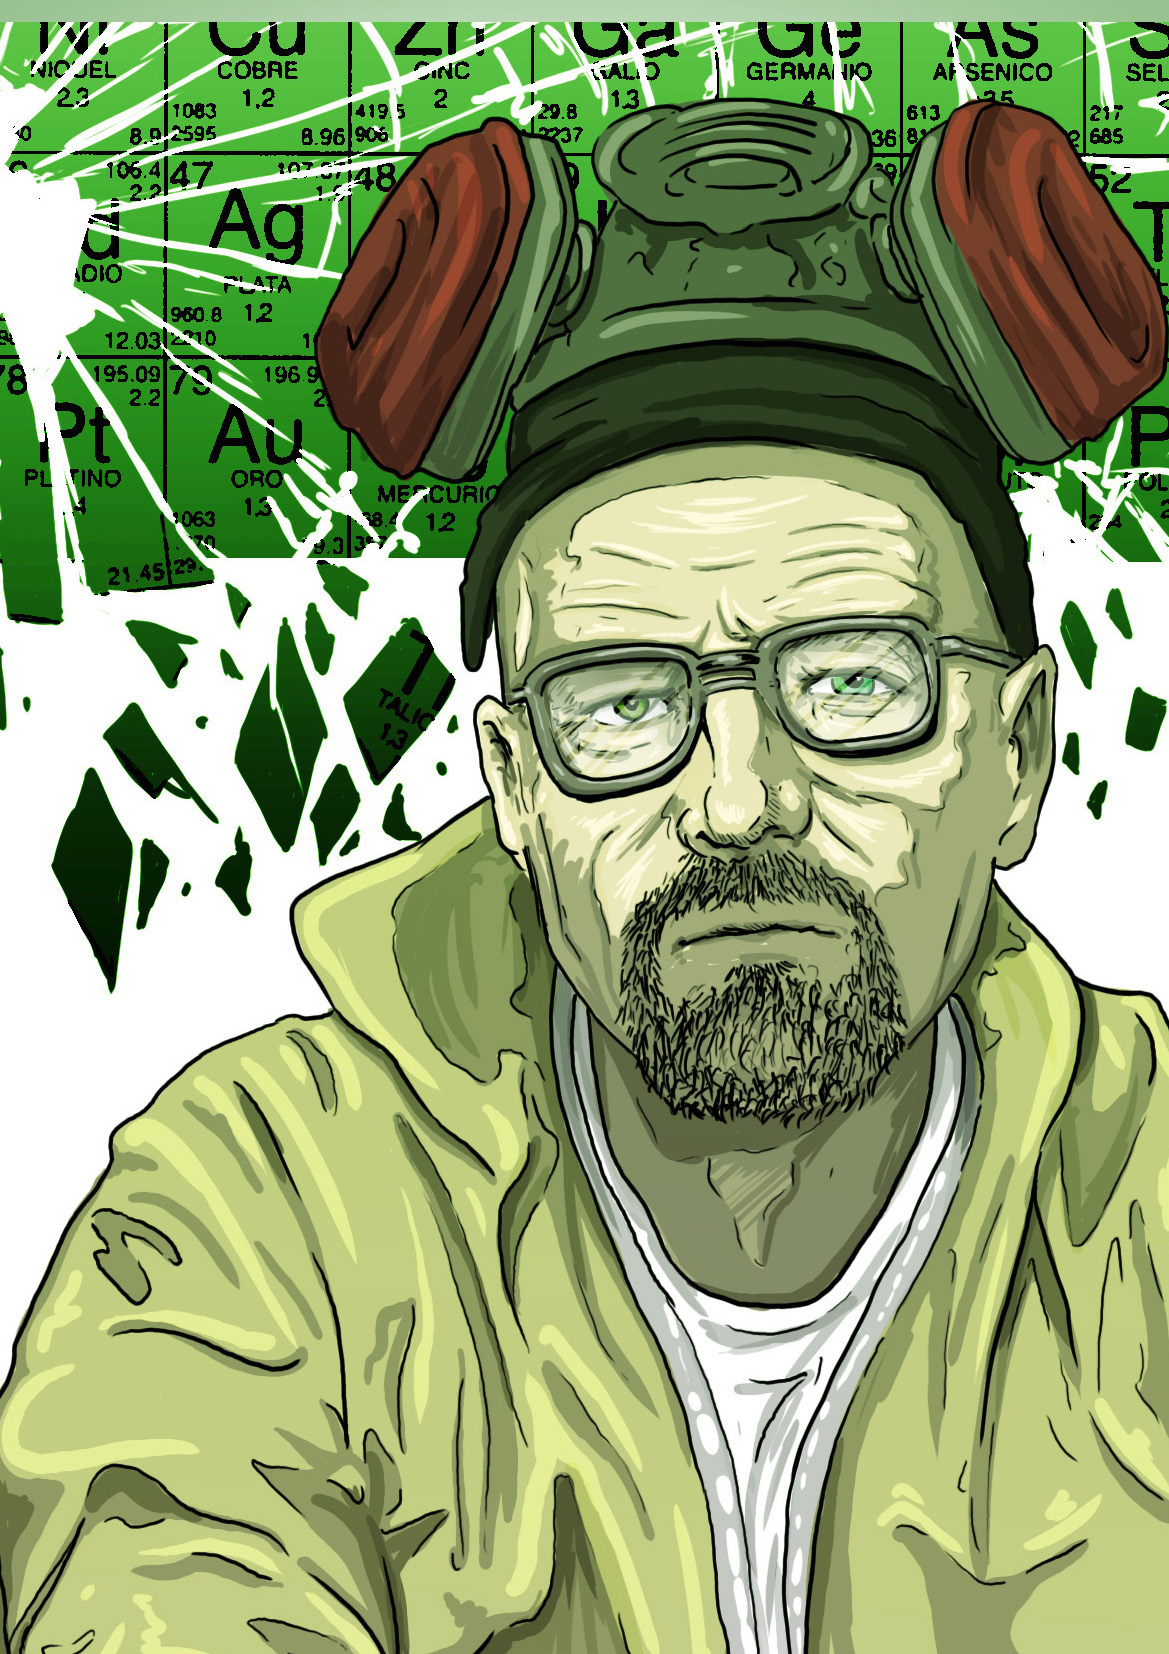 illustrations of the TV series "Breaking Bad" made in pho...